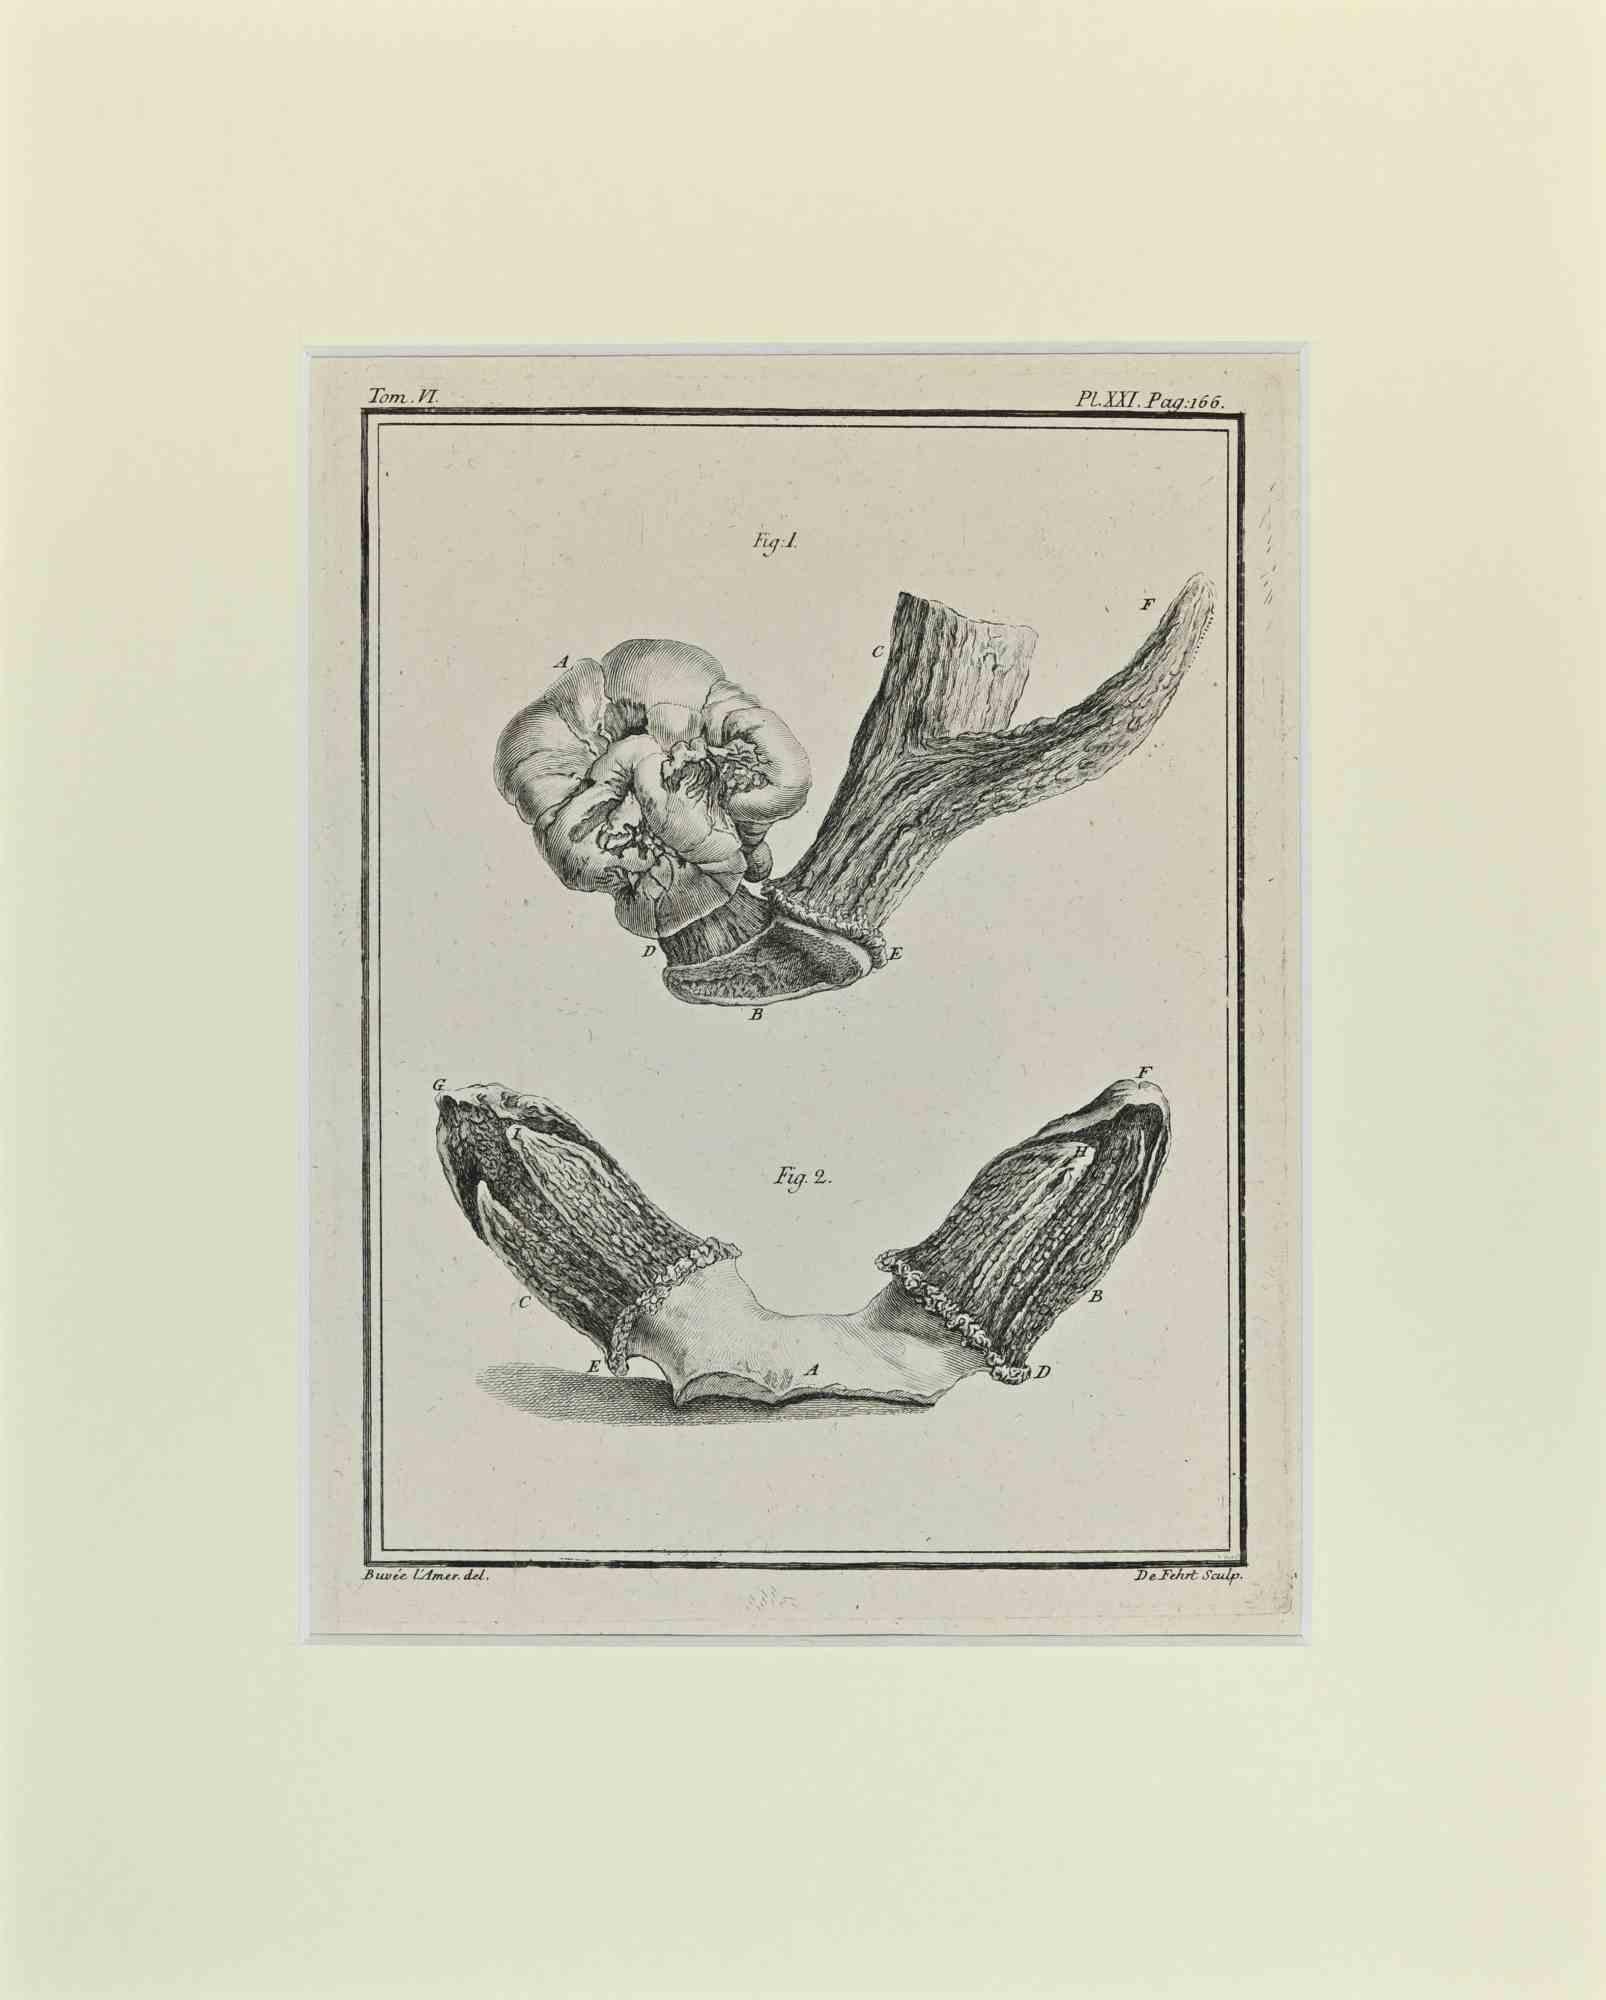 Deer Horns is an artwork realized  by  Buvée l'Américain in 1771.  

Etching B./W. print  on ivory paper. Signed on  plate on the lower left margin.

The work is glued on cardboard. Total dimensions: 35x28 cm.

The artwork belongs to the suite